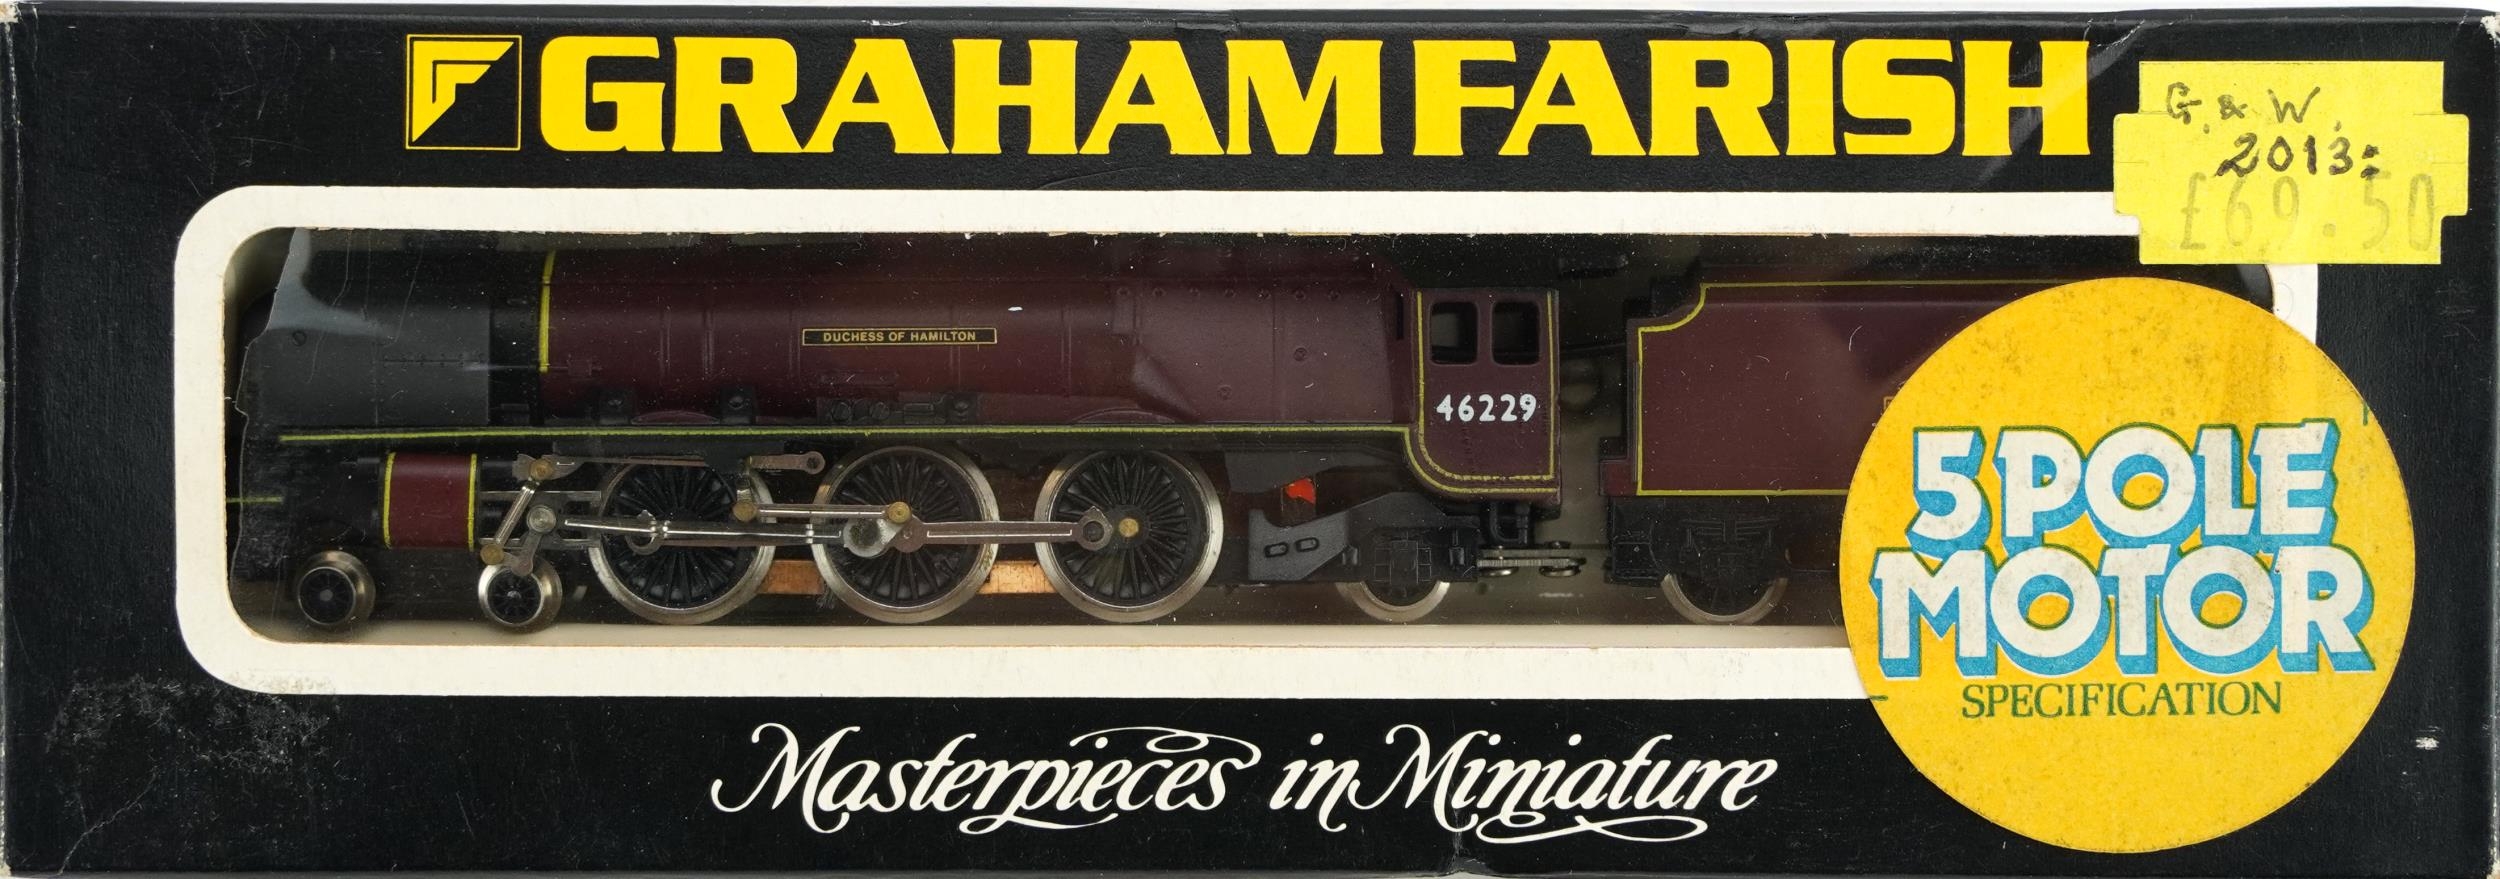 Two Graham Farish N gauge model railway locomotives with tenders and cases, numbers 1816 and 1901 - Image 2 of 3